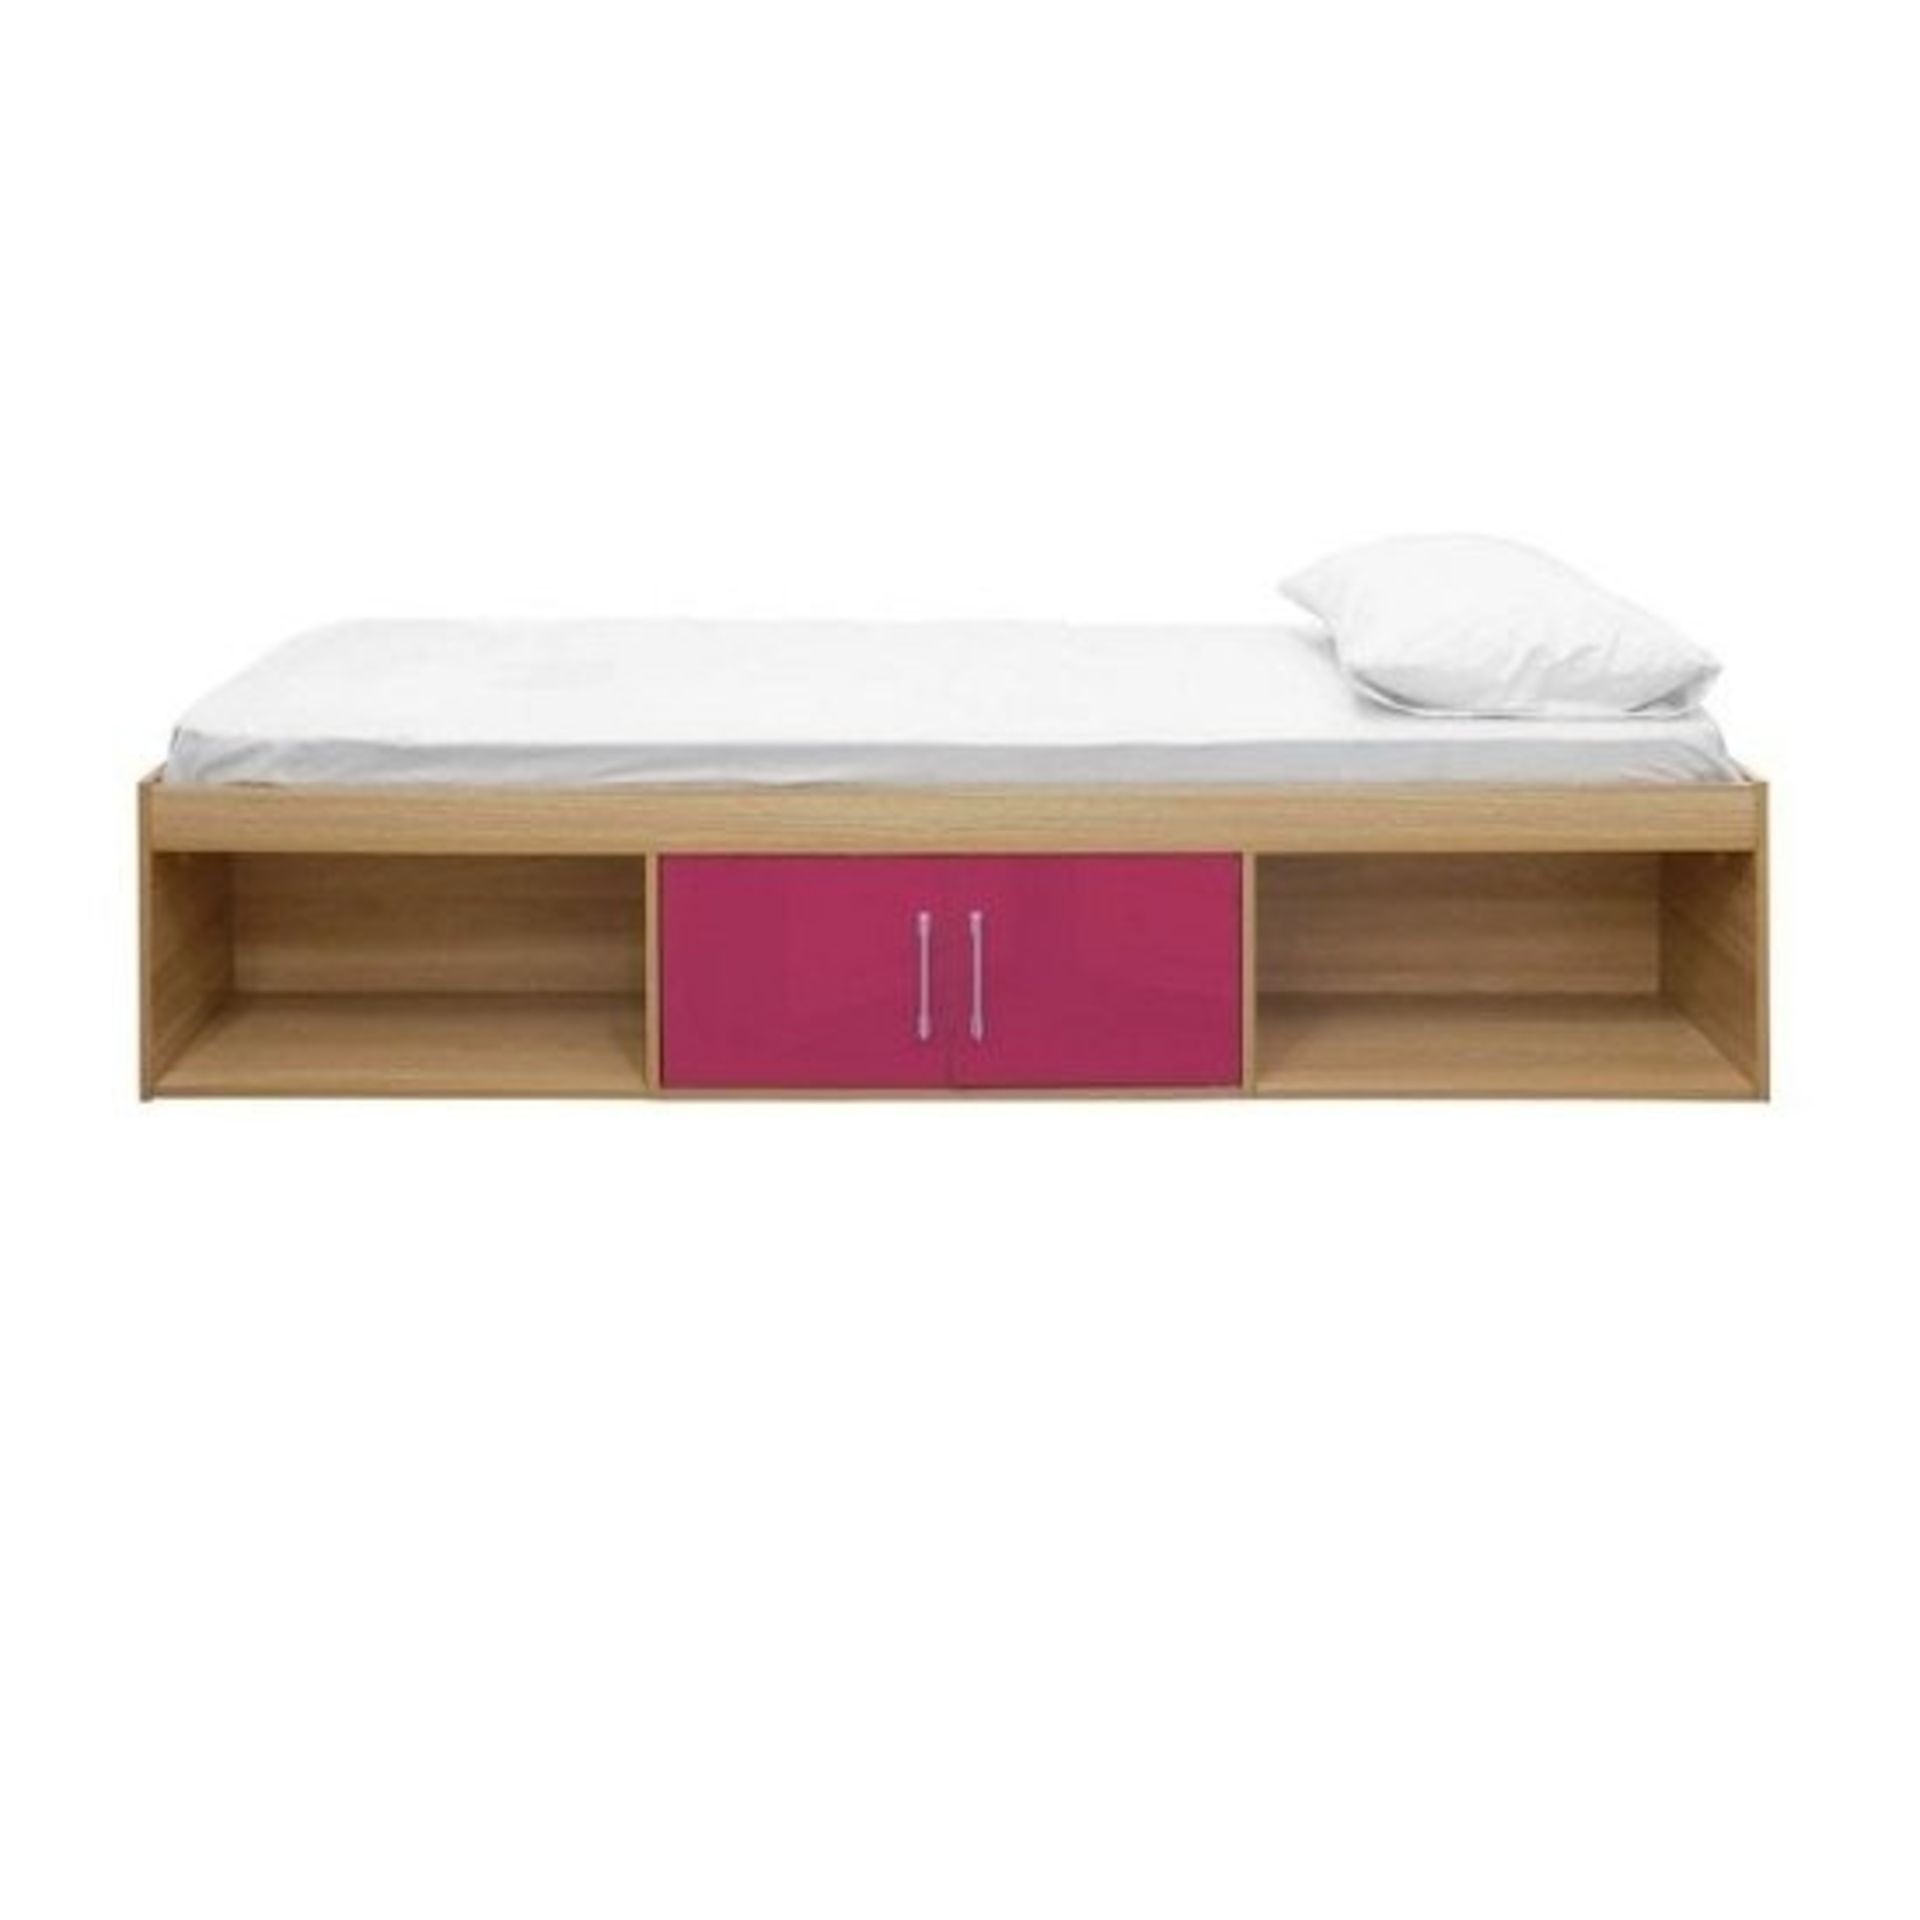 NEW BOXED Dakota Wooden Single Cabin Bed In High Gloss Pink And Matt Oak. (ROW17) RRP £499.95. The